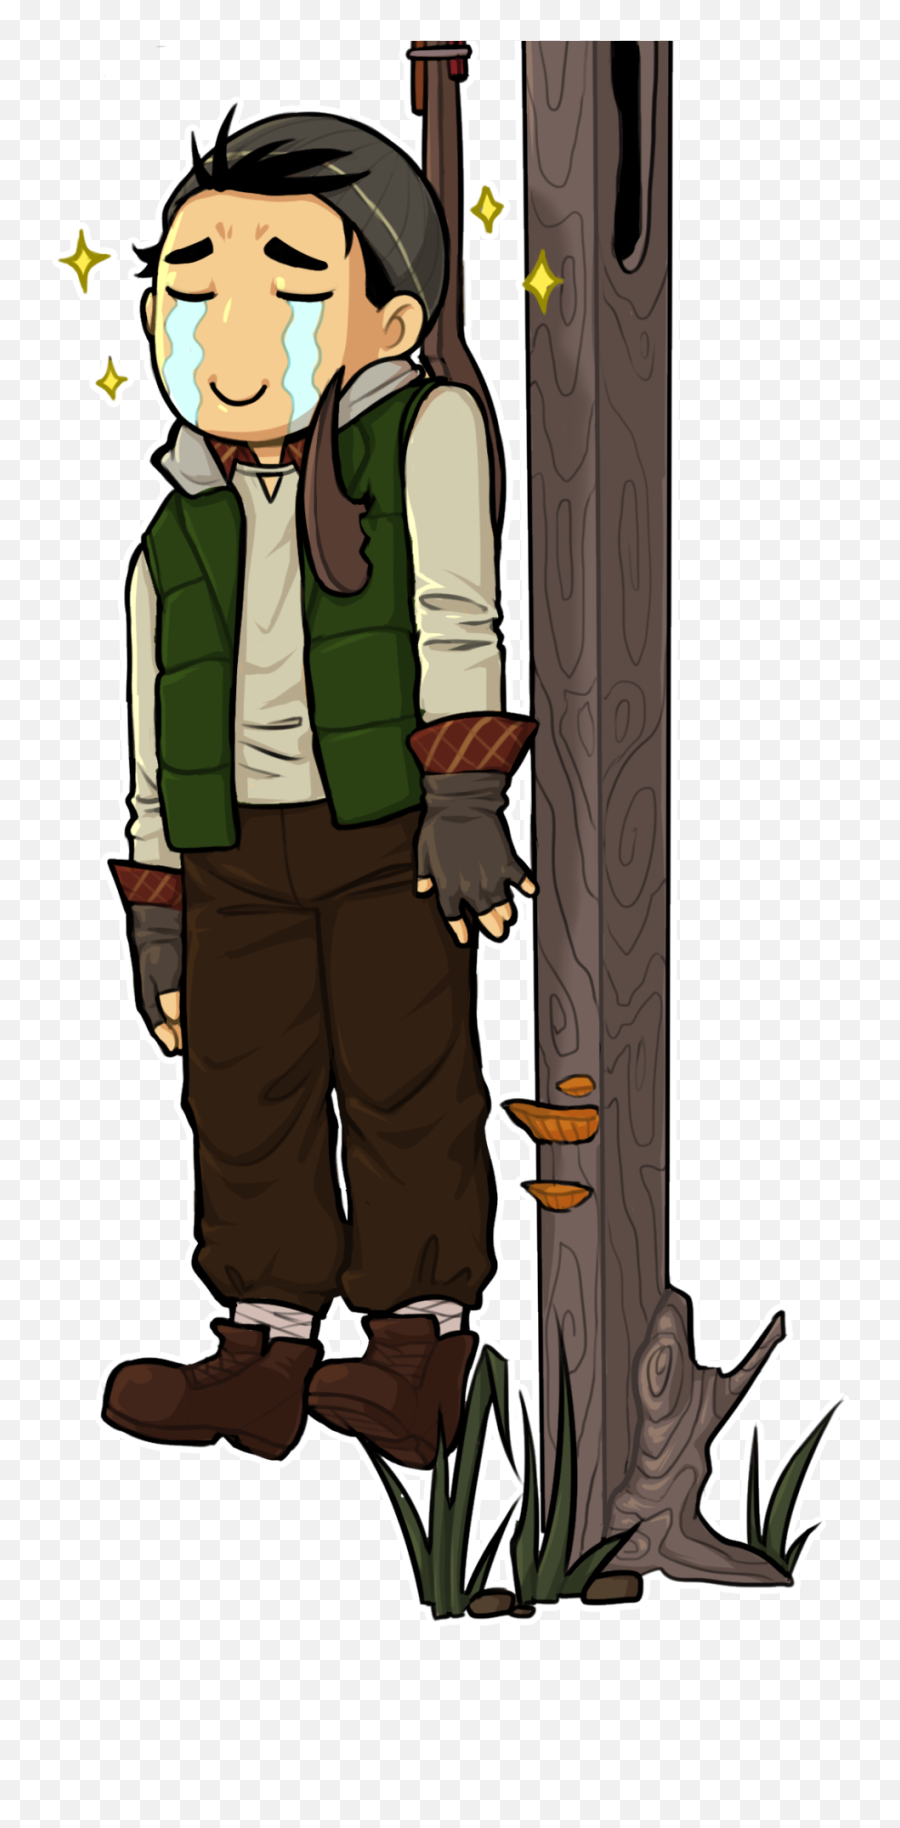 Download Dead By Daylight - Cartoon Png Image With No Dead By Daylight Cartoon Transparent,Dead By Daylight Png